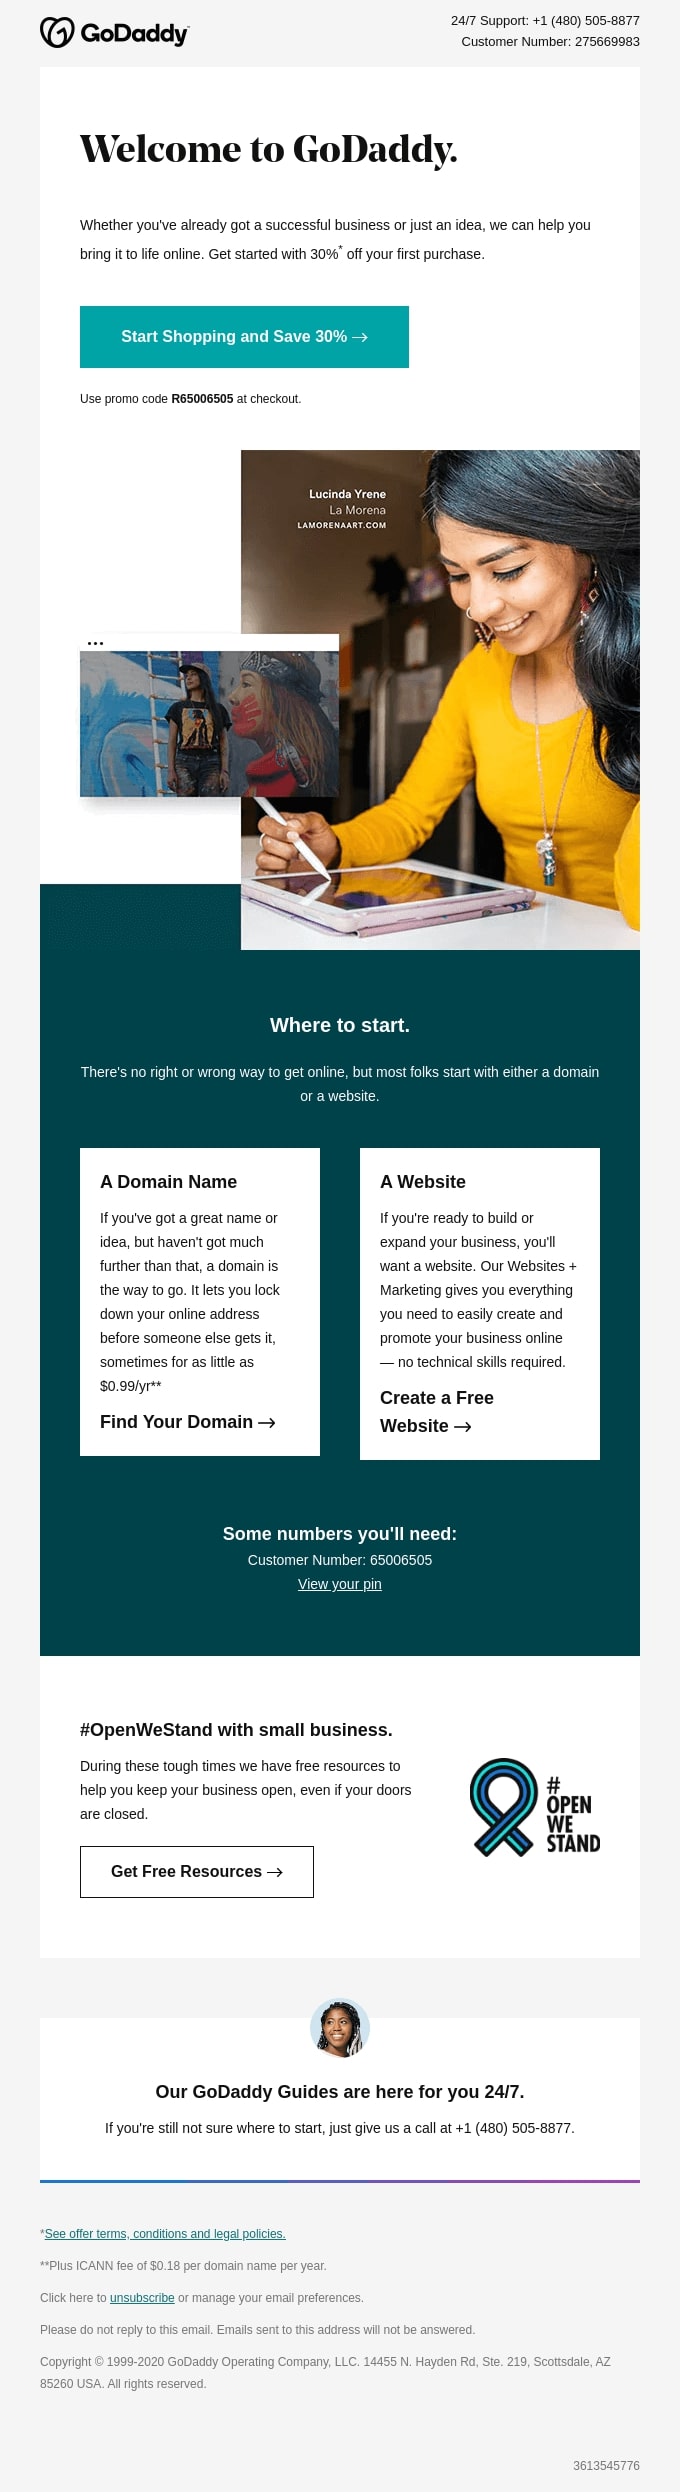 Welcome Email Example Godaddy